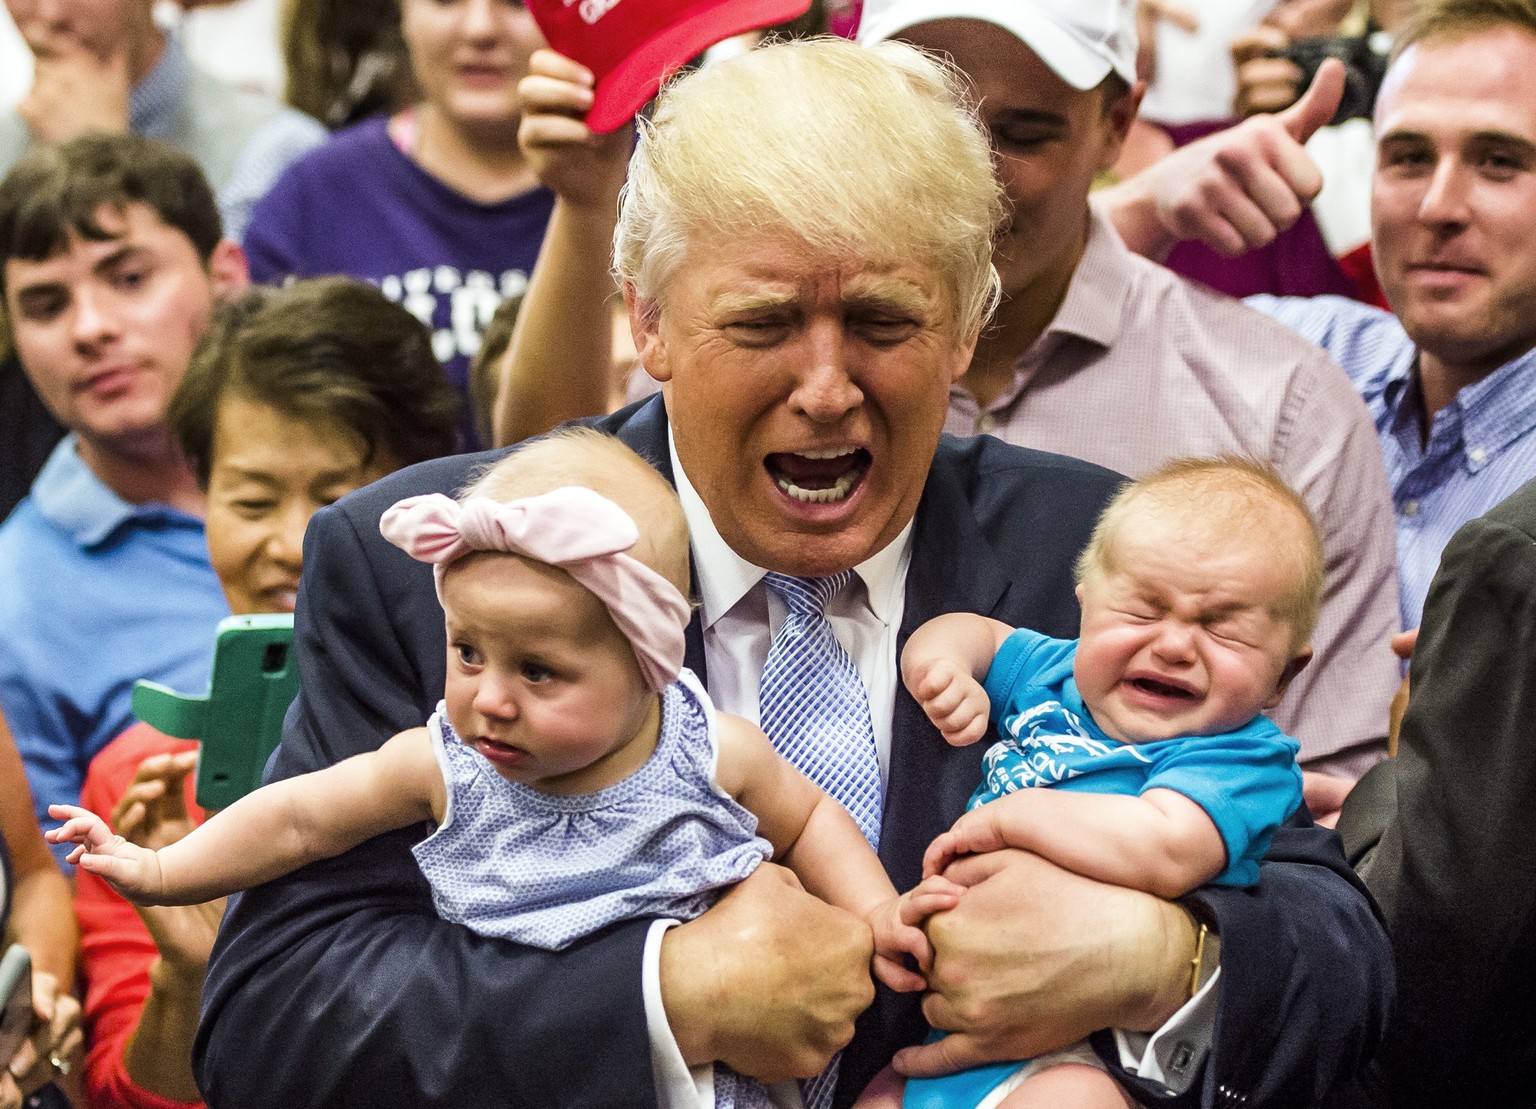 Republican presidential candidate Donald Trump holds baby cousins Evelyn Kate Keane, 6 months old, and Kellen Campbell, 3 months old, following his speech Friday, July 29, 2016, in Colorado Springs, C ...